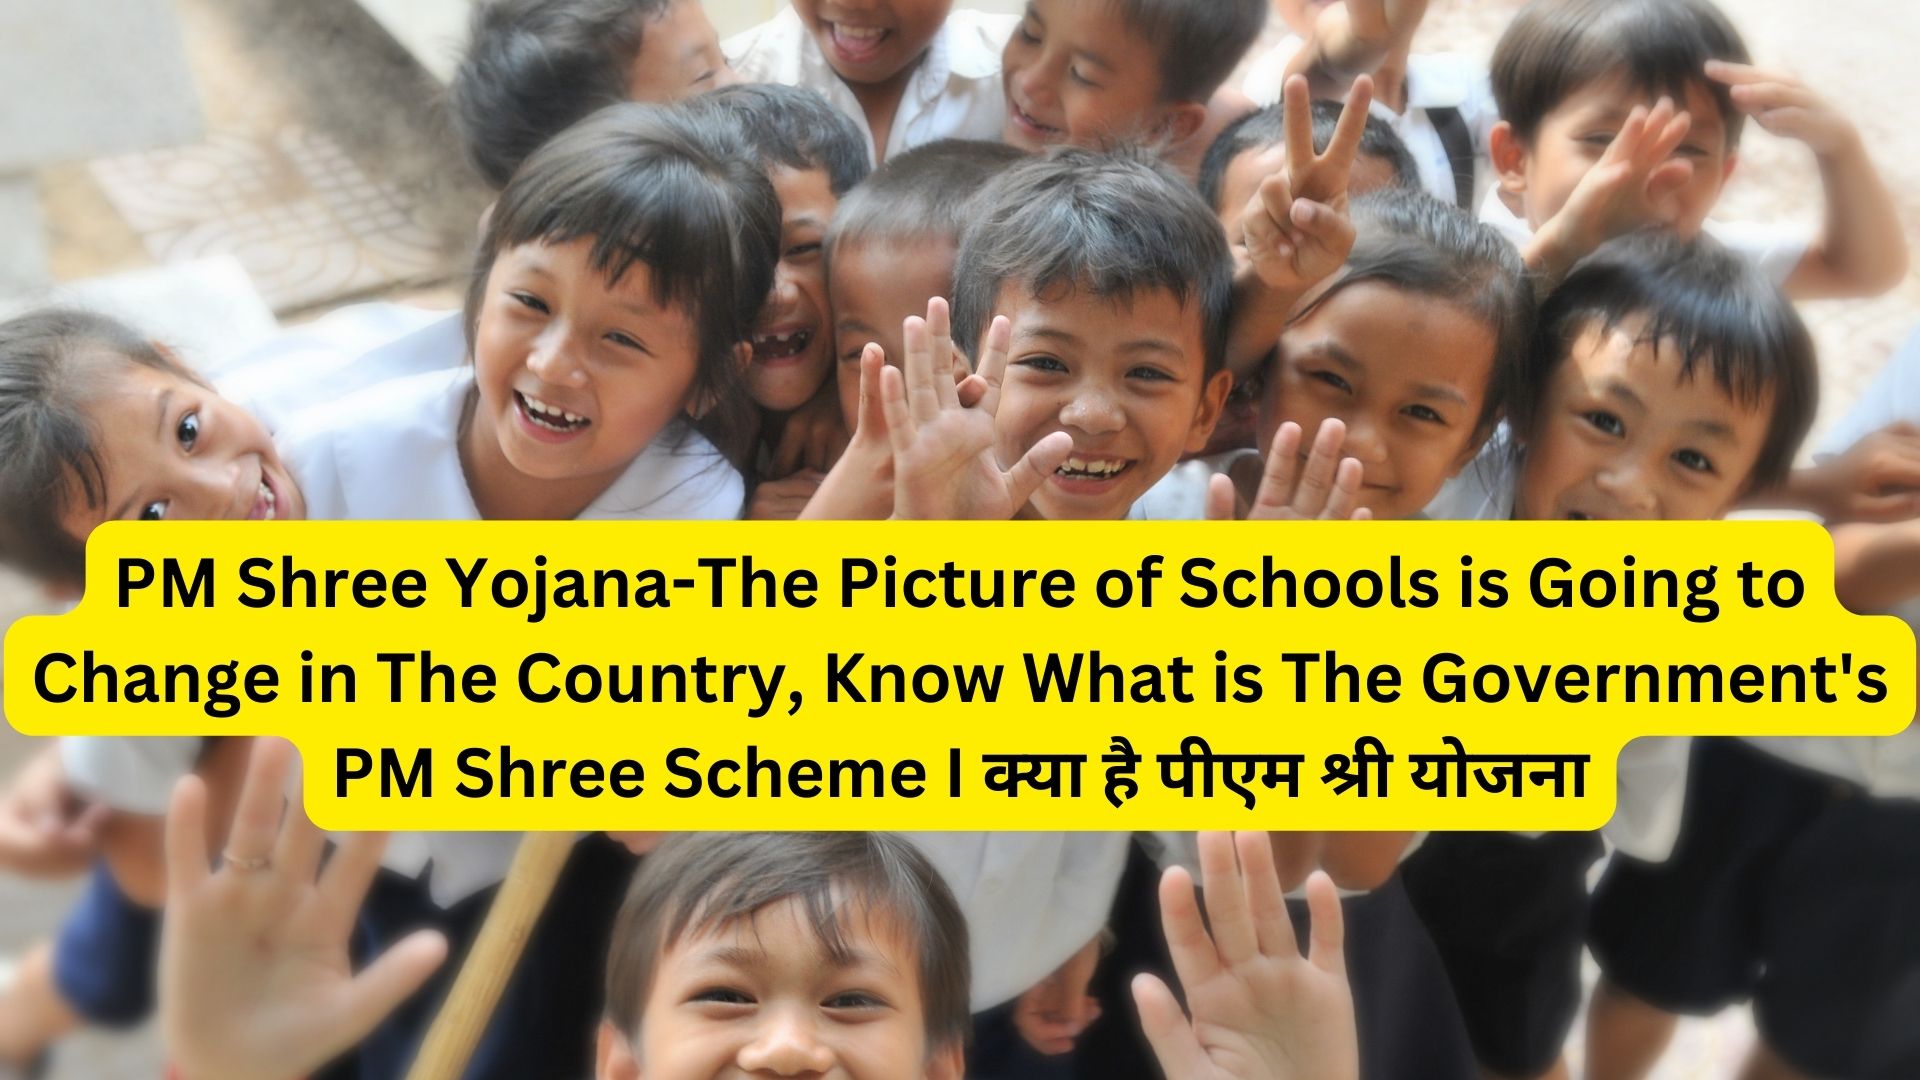 PM Shree Yojana-The Picture of Schools is Going to Change in The Country, Know What is The Government's PM Shree Scheme I क्या है पीएम श्री योजना